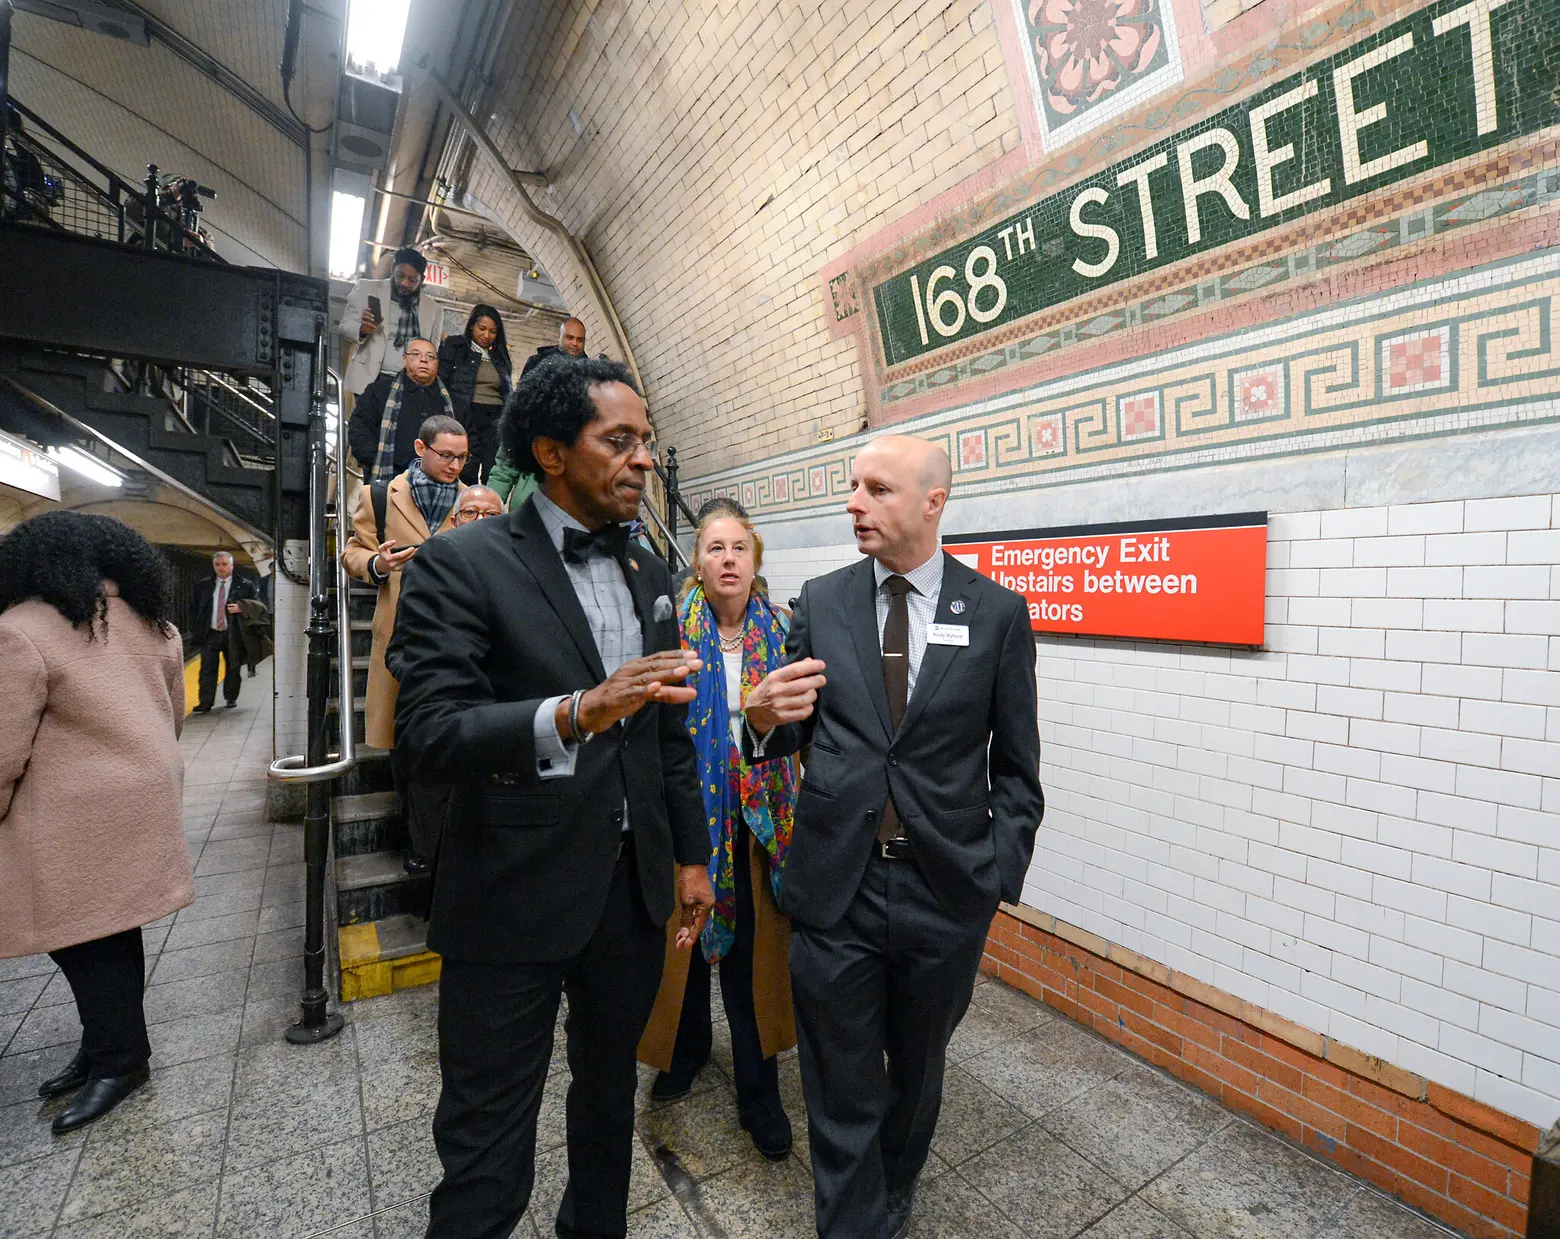 168th Street and Astoria Boulevard subway stations finally reopen